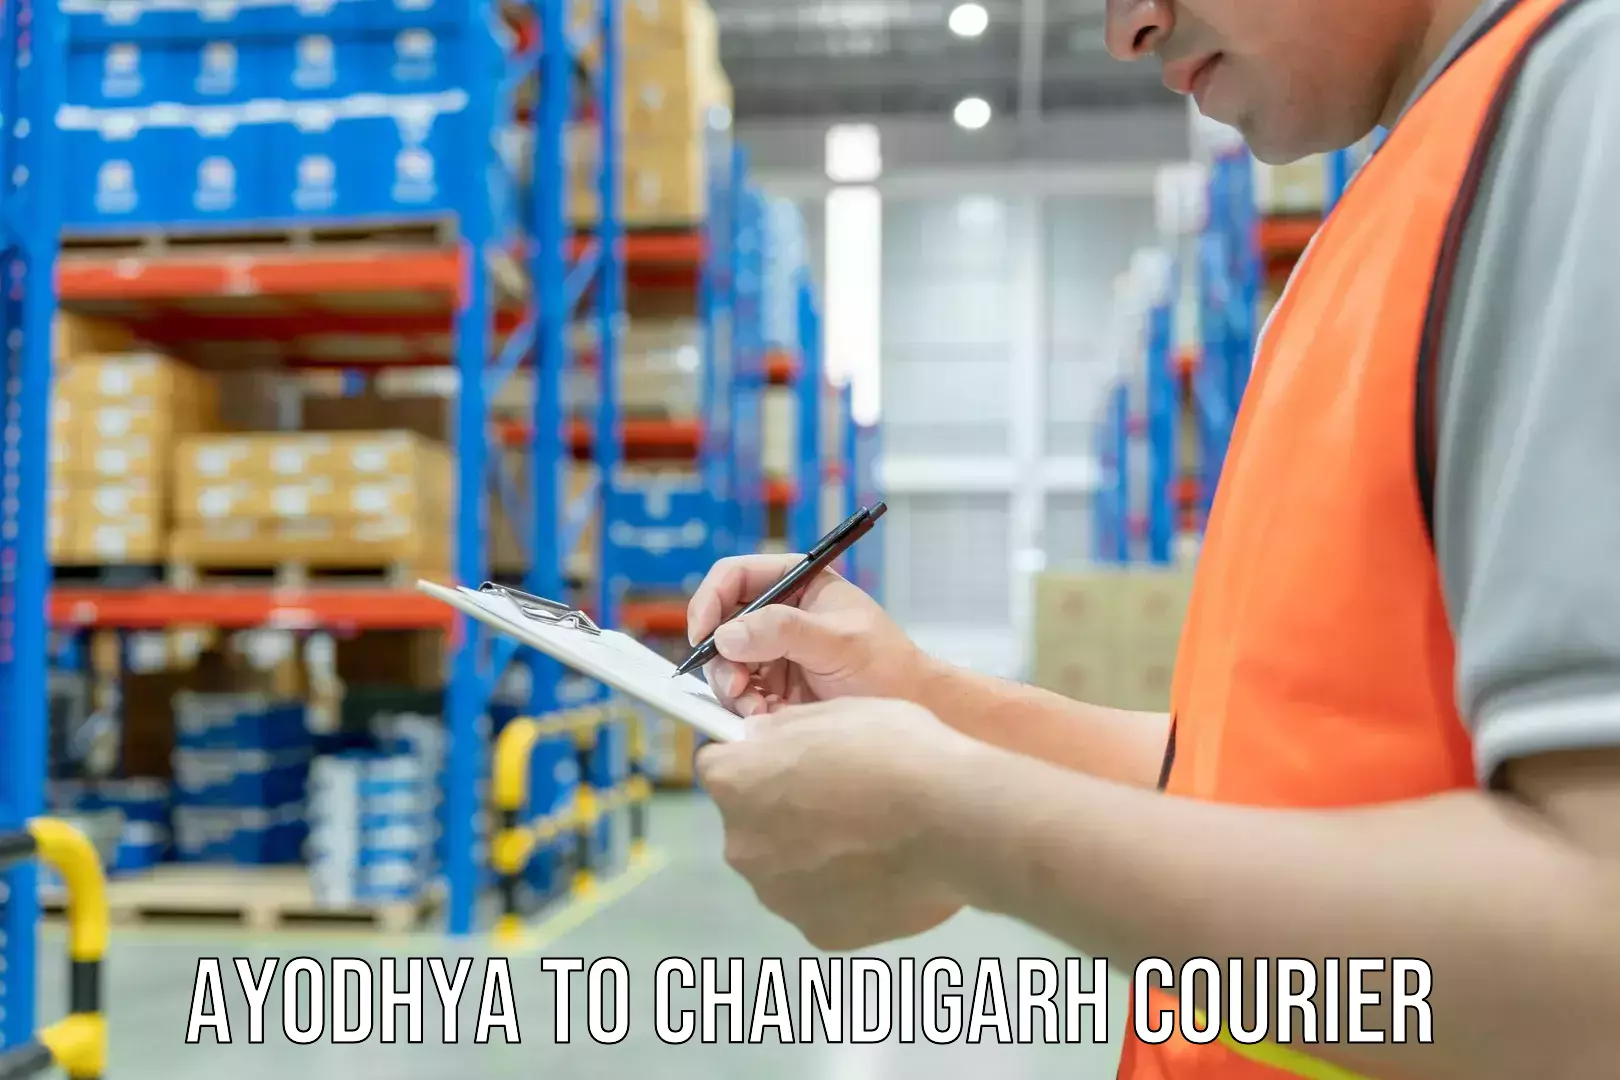 Overnight delivery services Ayodhya to Chandigarh